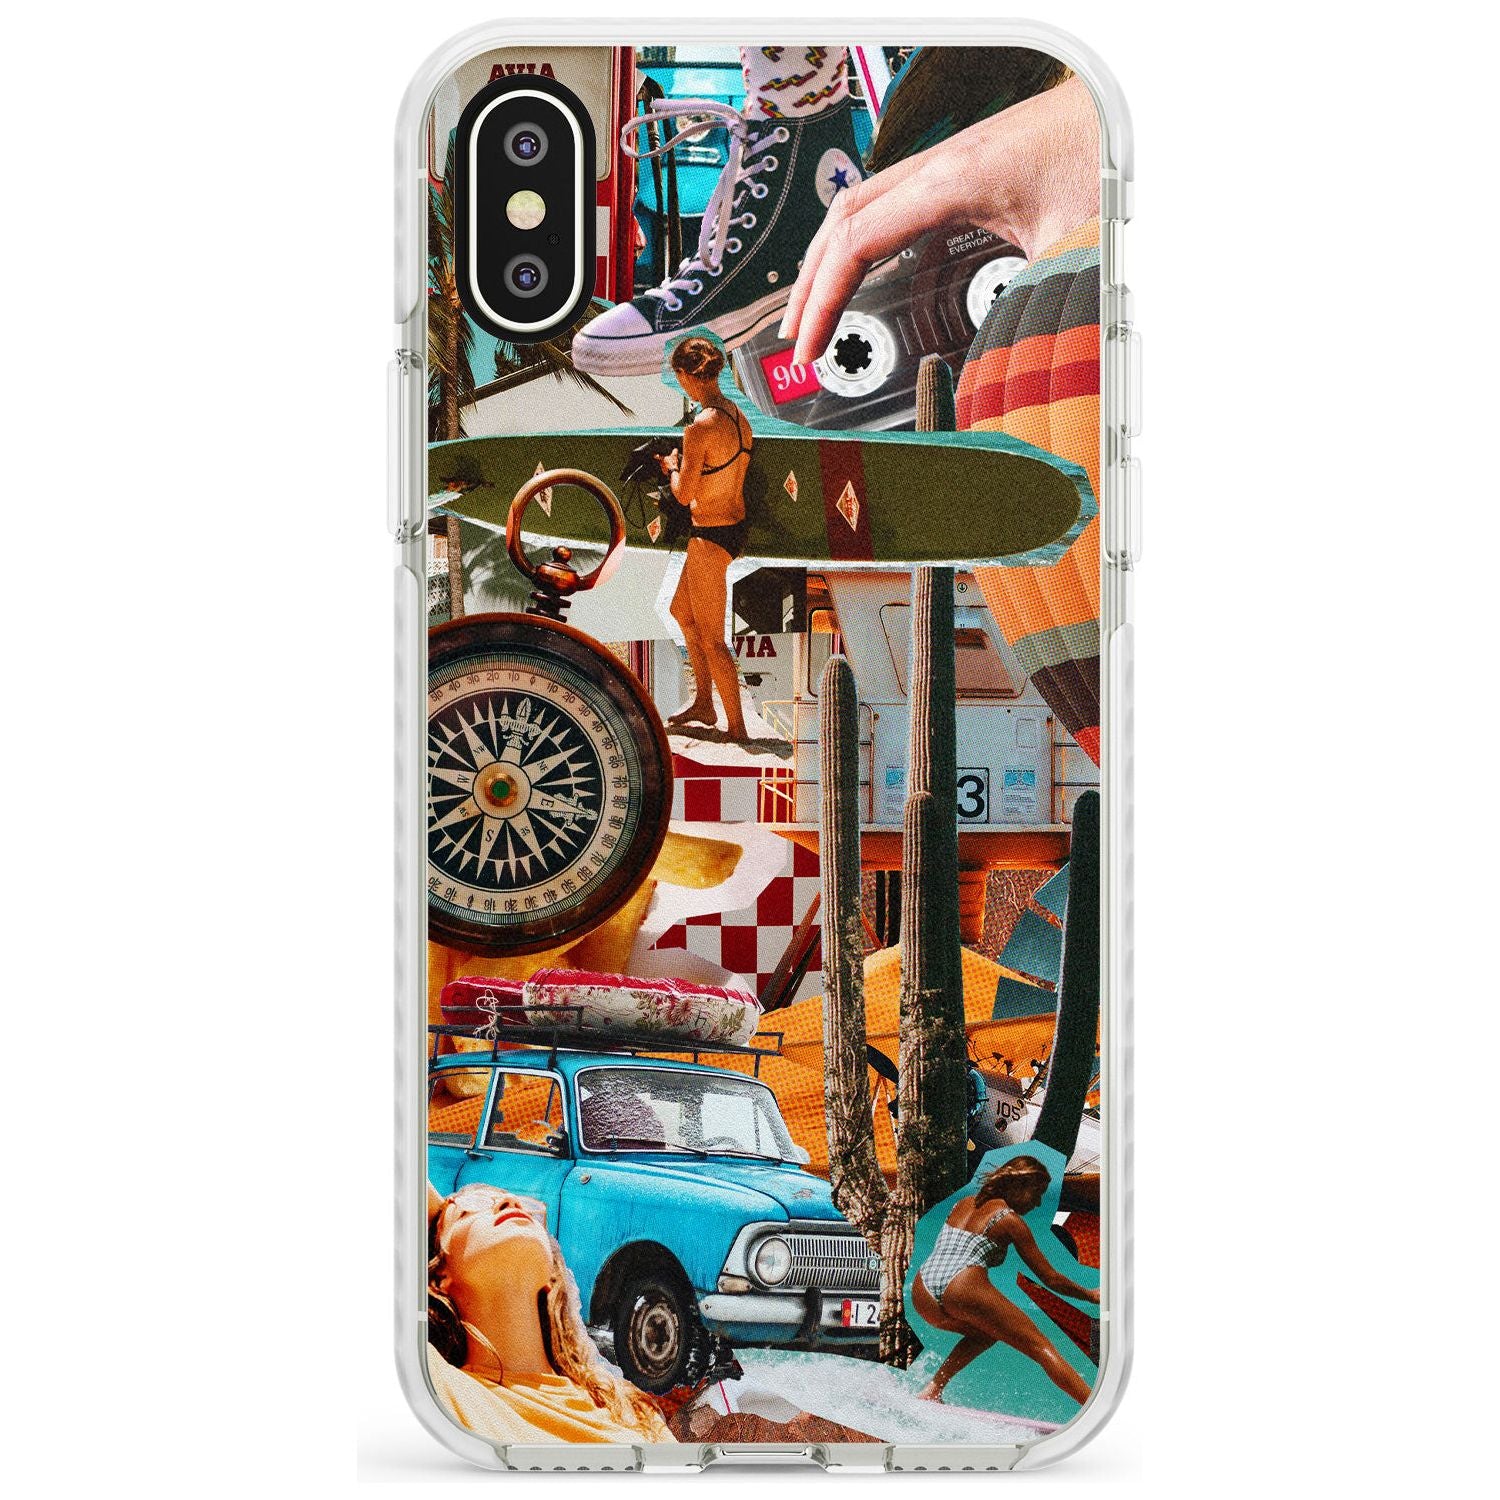 Vintage Collage: Road Trip Impact Phone Case for iPhone X XS Max XR